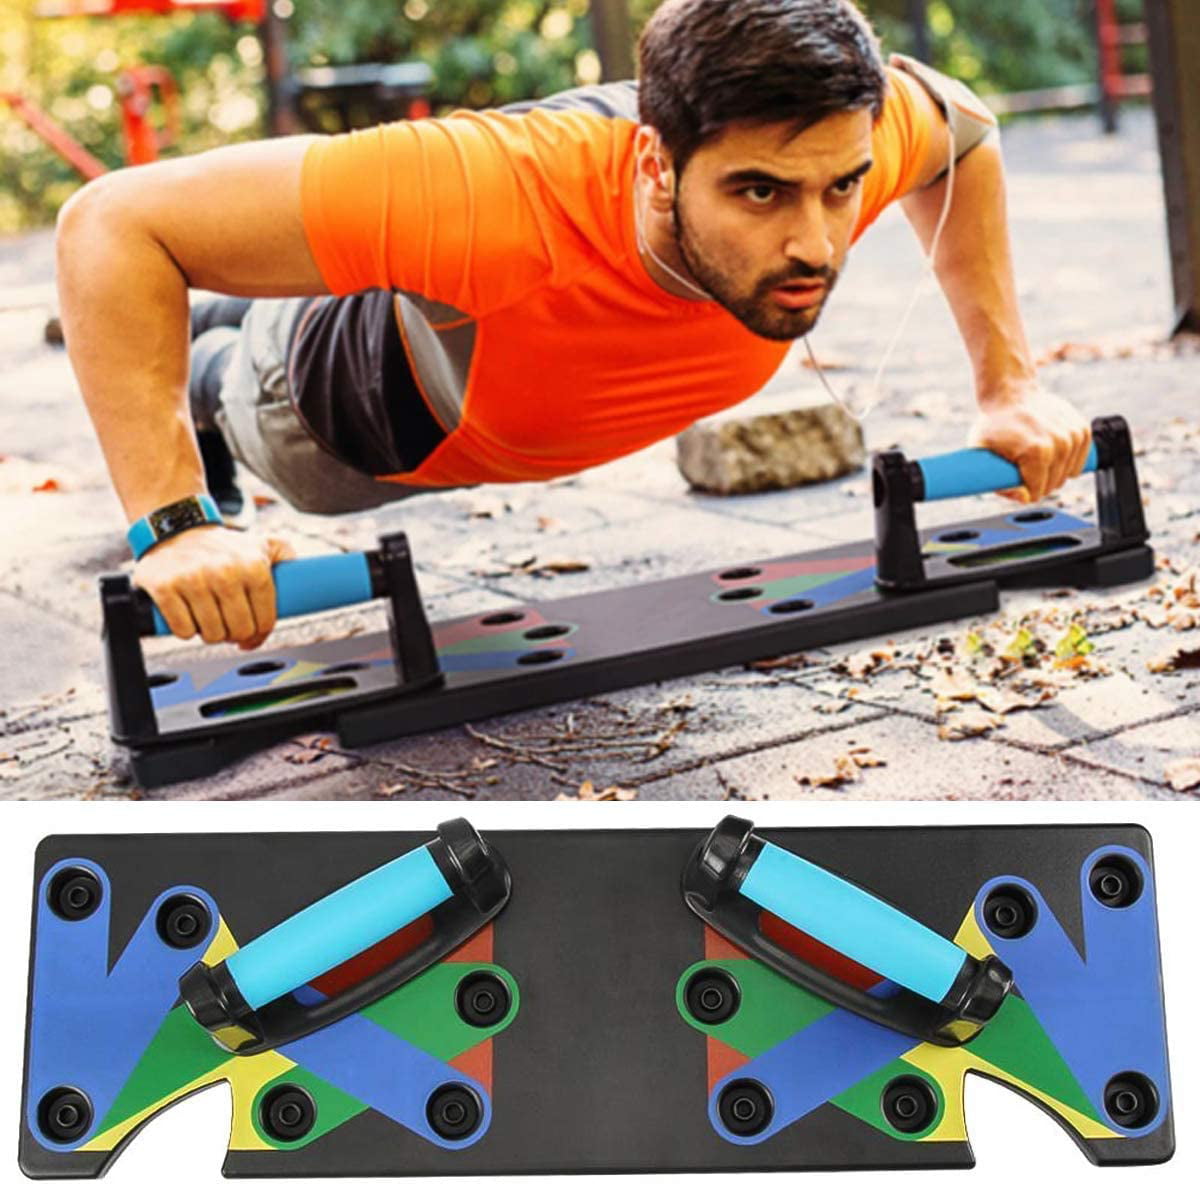 Details about   Push Up Board Home Gym Building Muscle Training Workout Exercise Press Up 